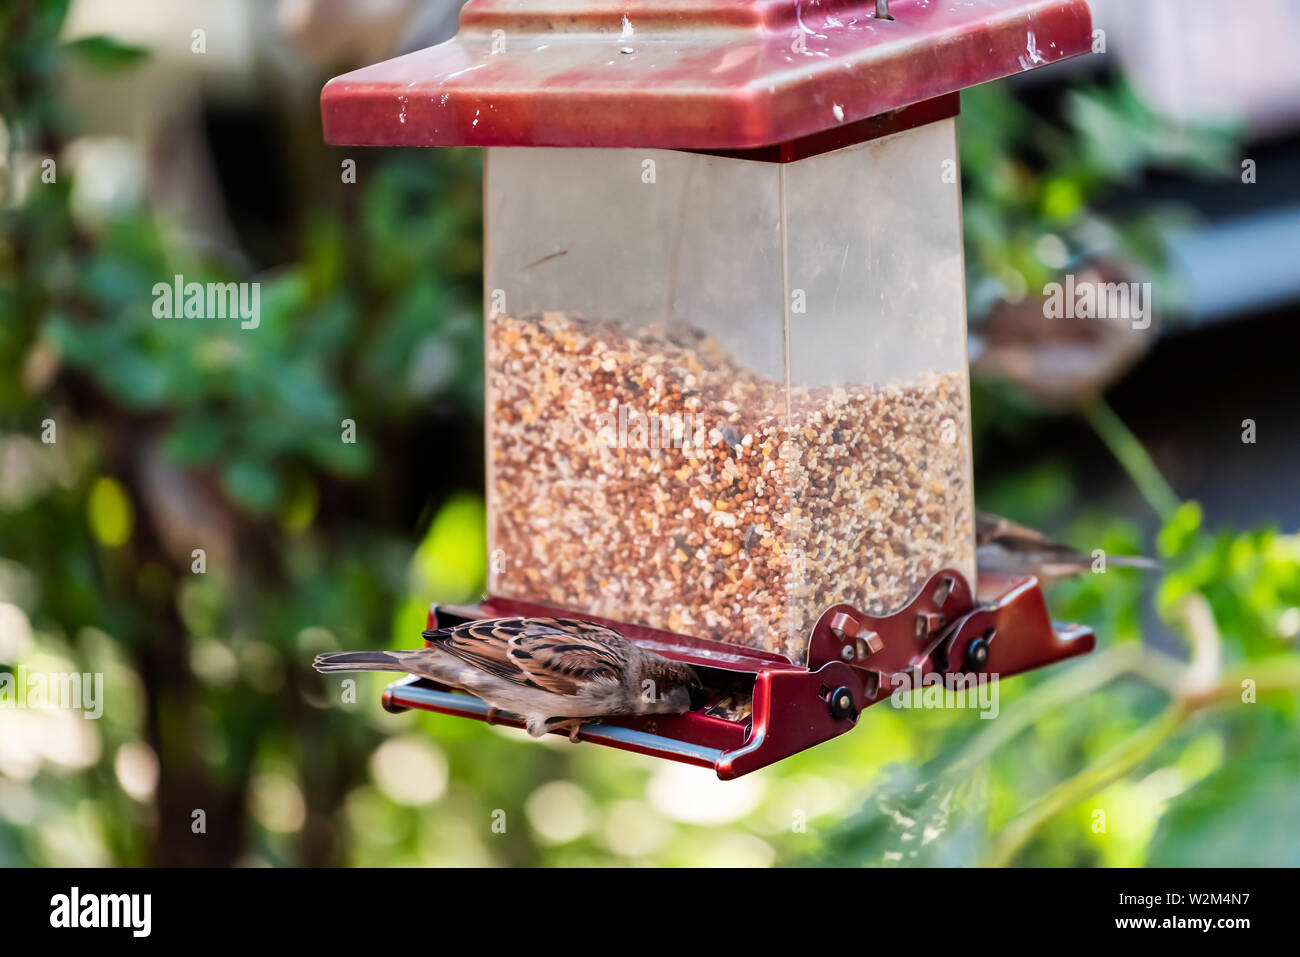 House sparrow bird perched on plastic feeder eating millet seeds outside in hanging garden and bokeh background Stock Photo